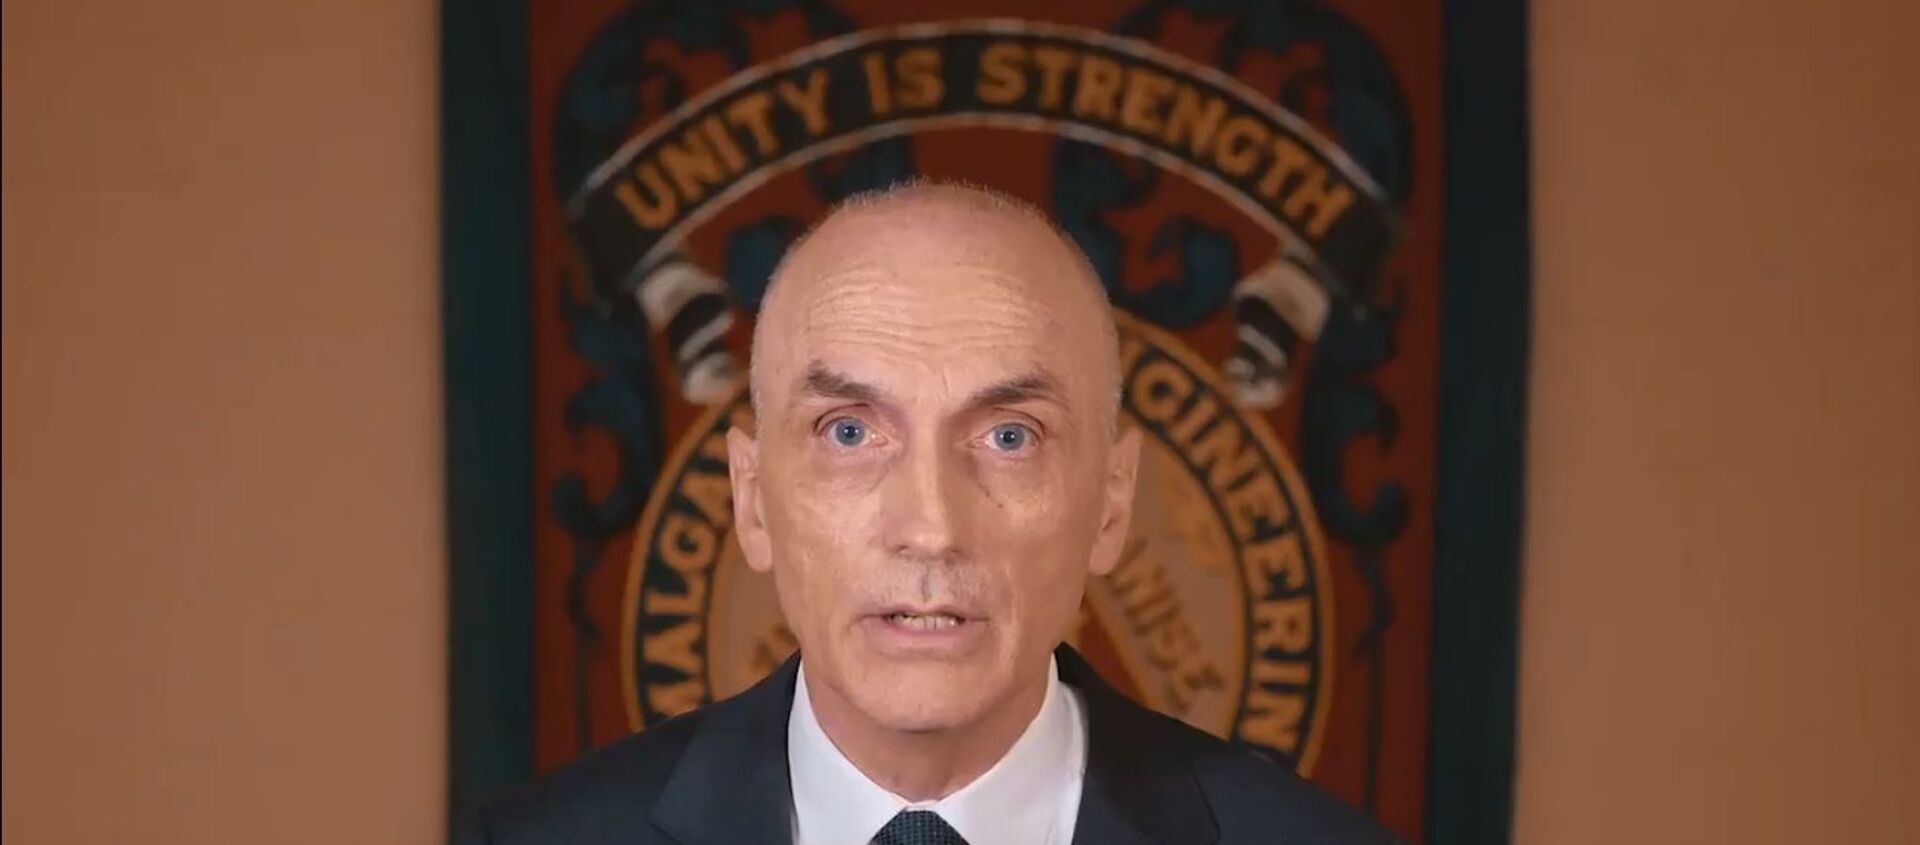 Chris Williamson announces he was awarded legal costs from Labour Party - Sputnik International, 1920, 17.12.2019